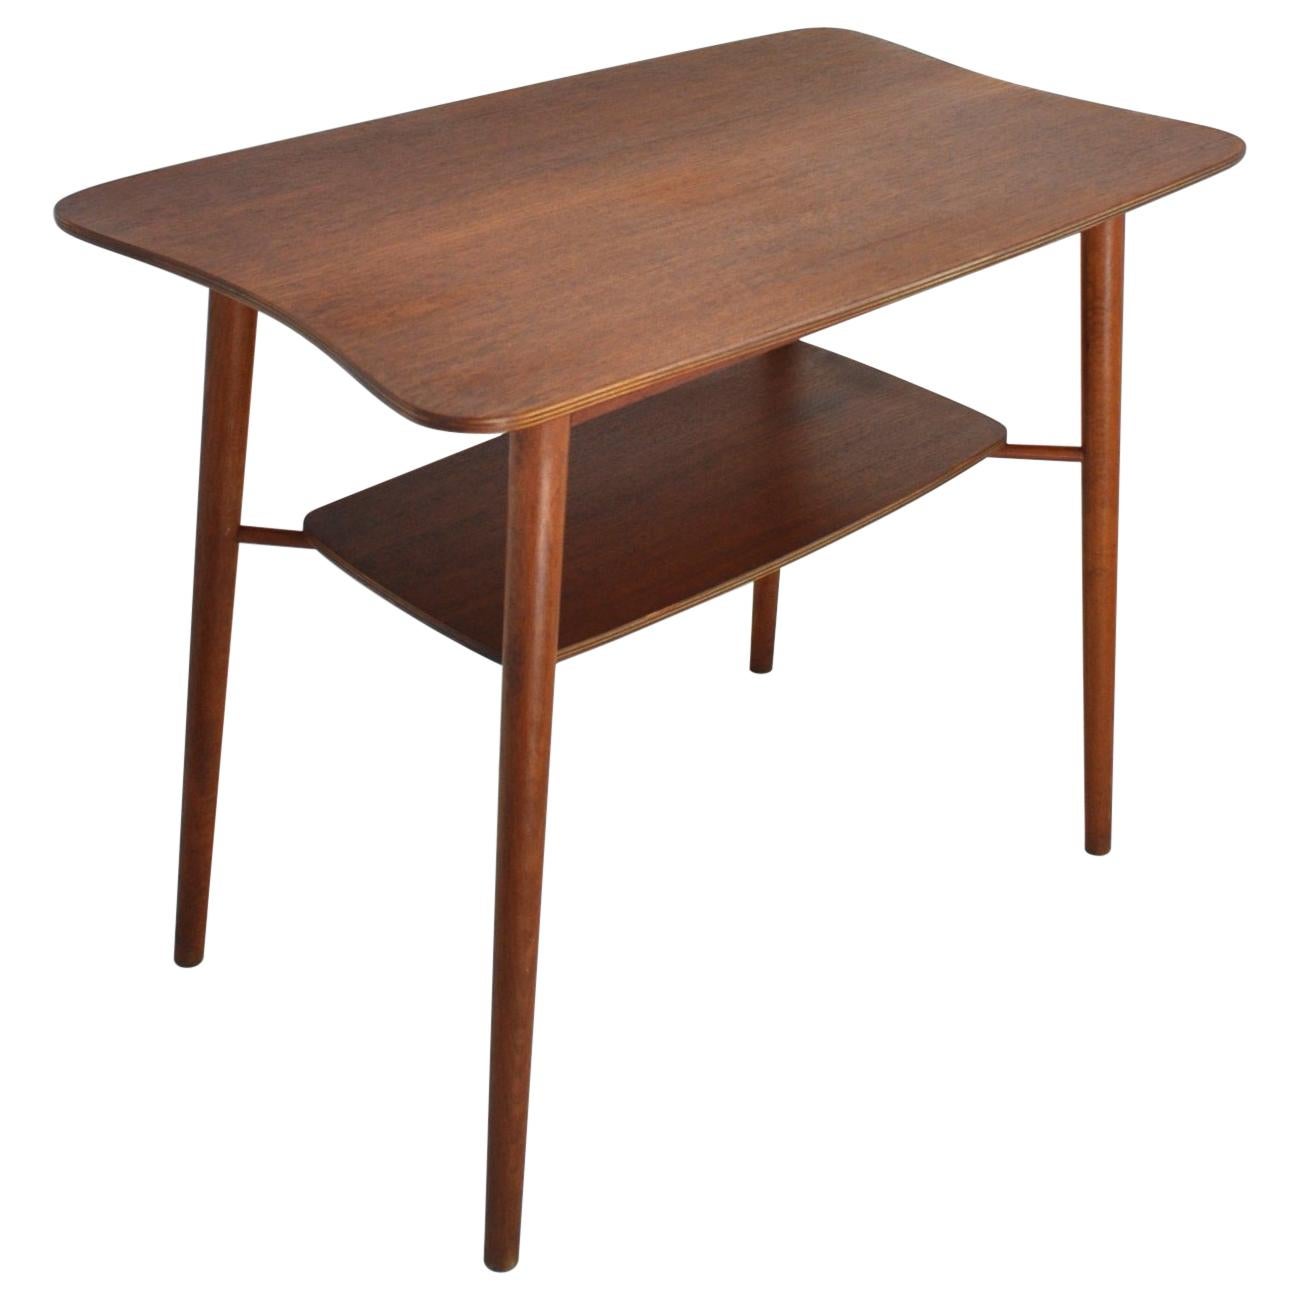 Midcentury Occasional Teak Side Table with a Organic Shape, 1960s